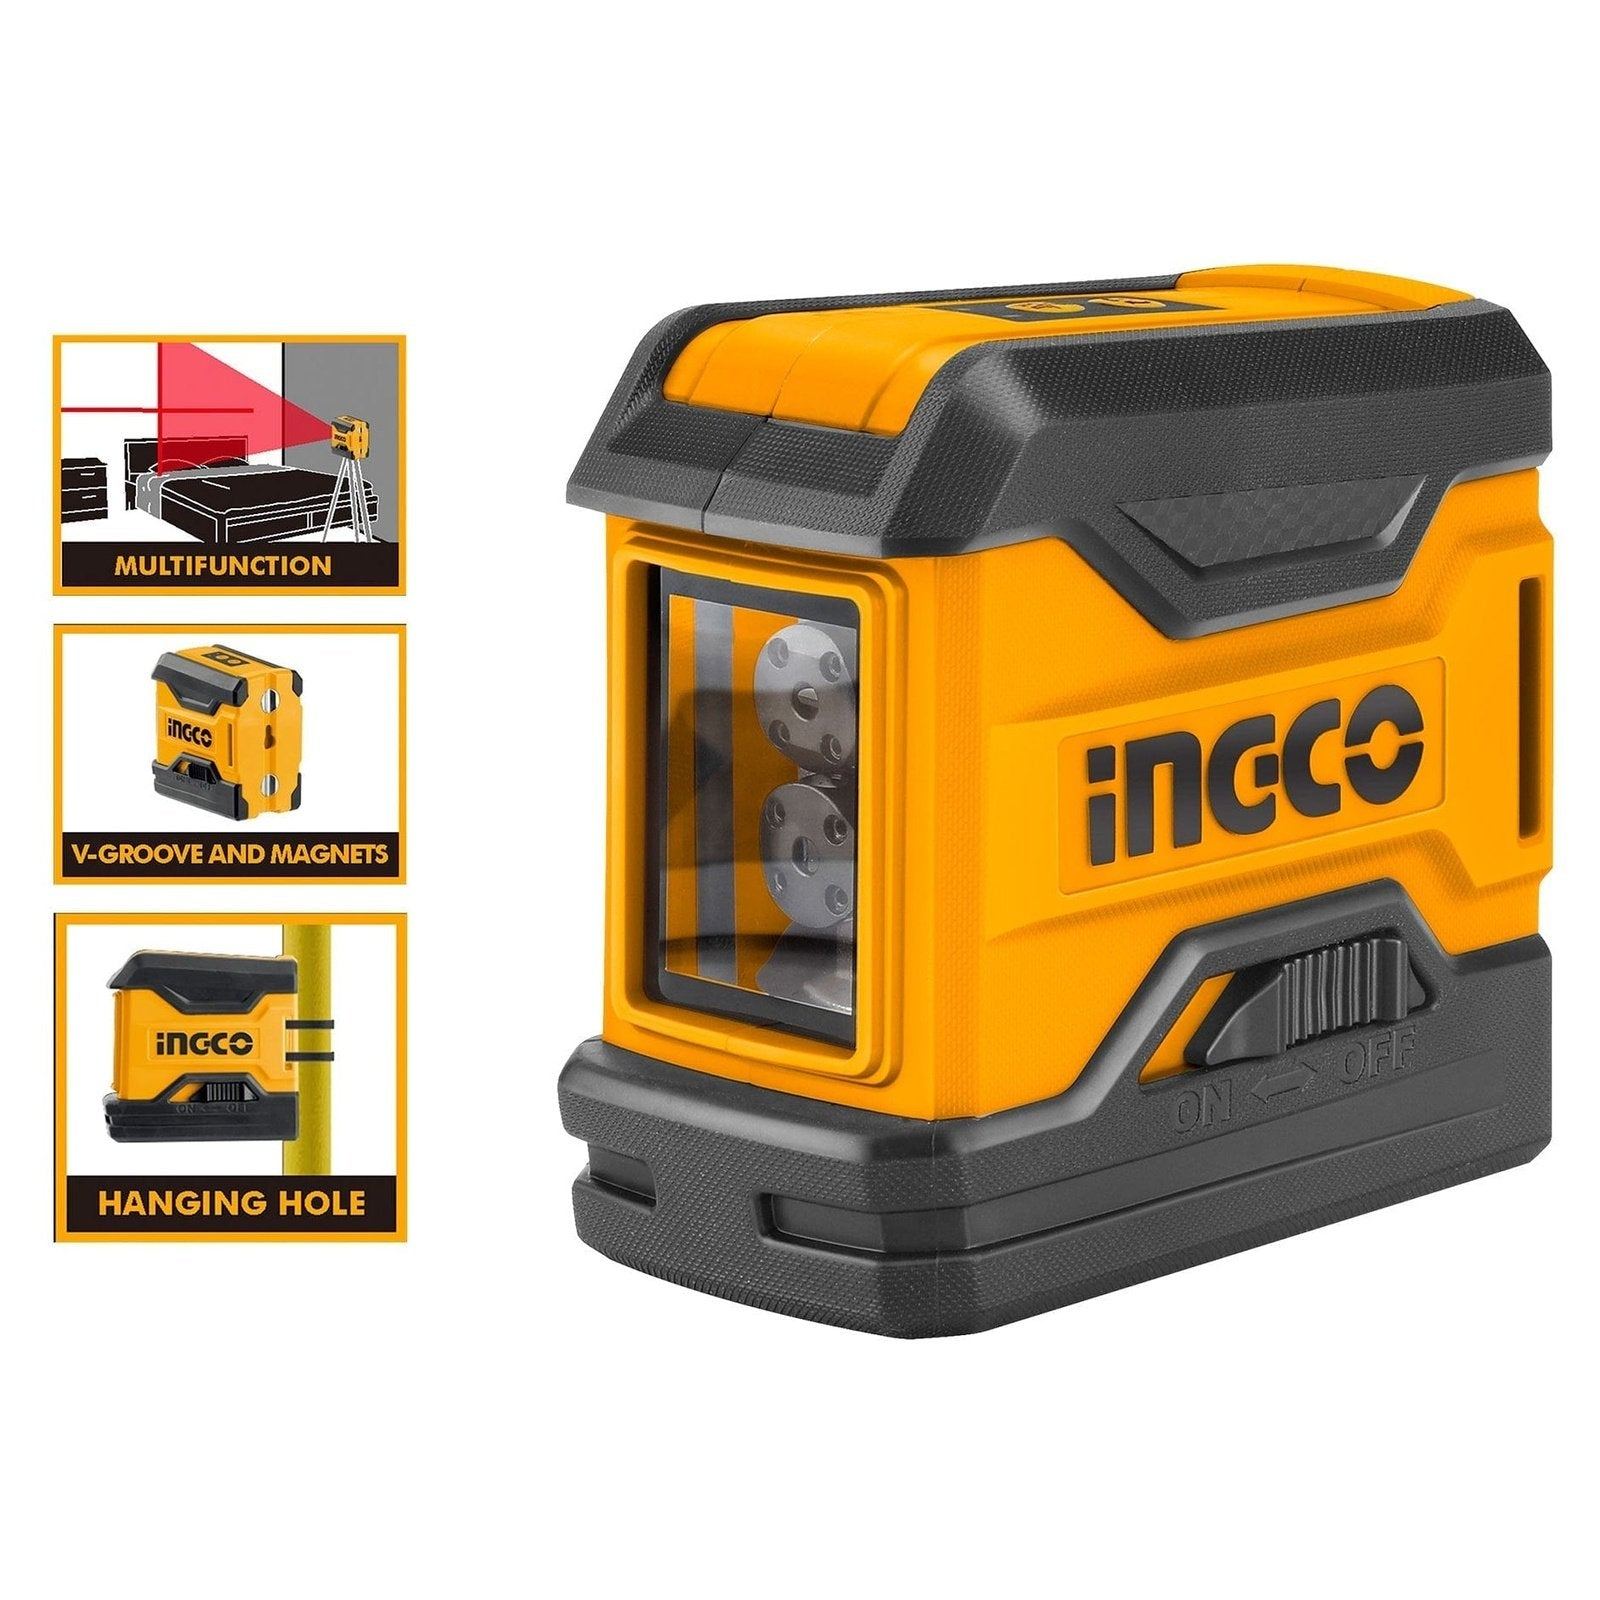 Ingco Self Leveling Line Laser 15m - HLL156508 | Buy Online in Accra, Ghana - Supply Master Laser Measure Buy Tools hardware Building materials